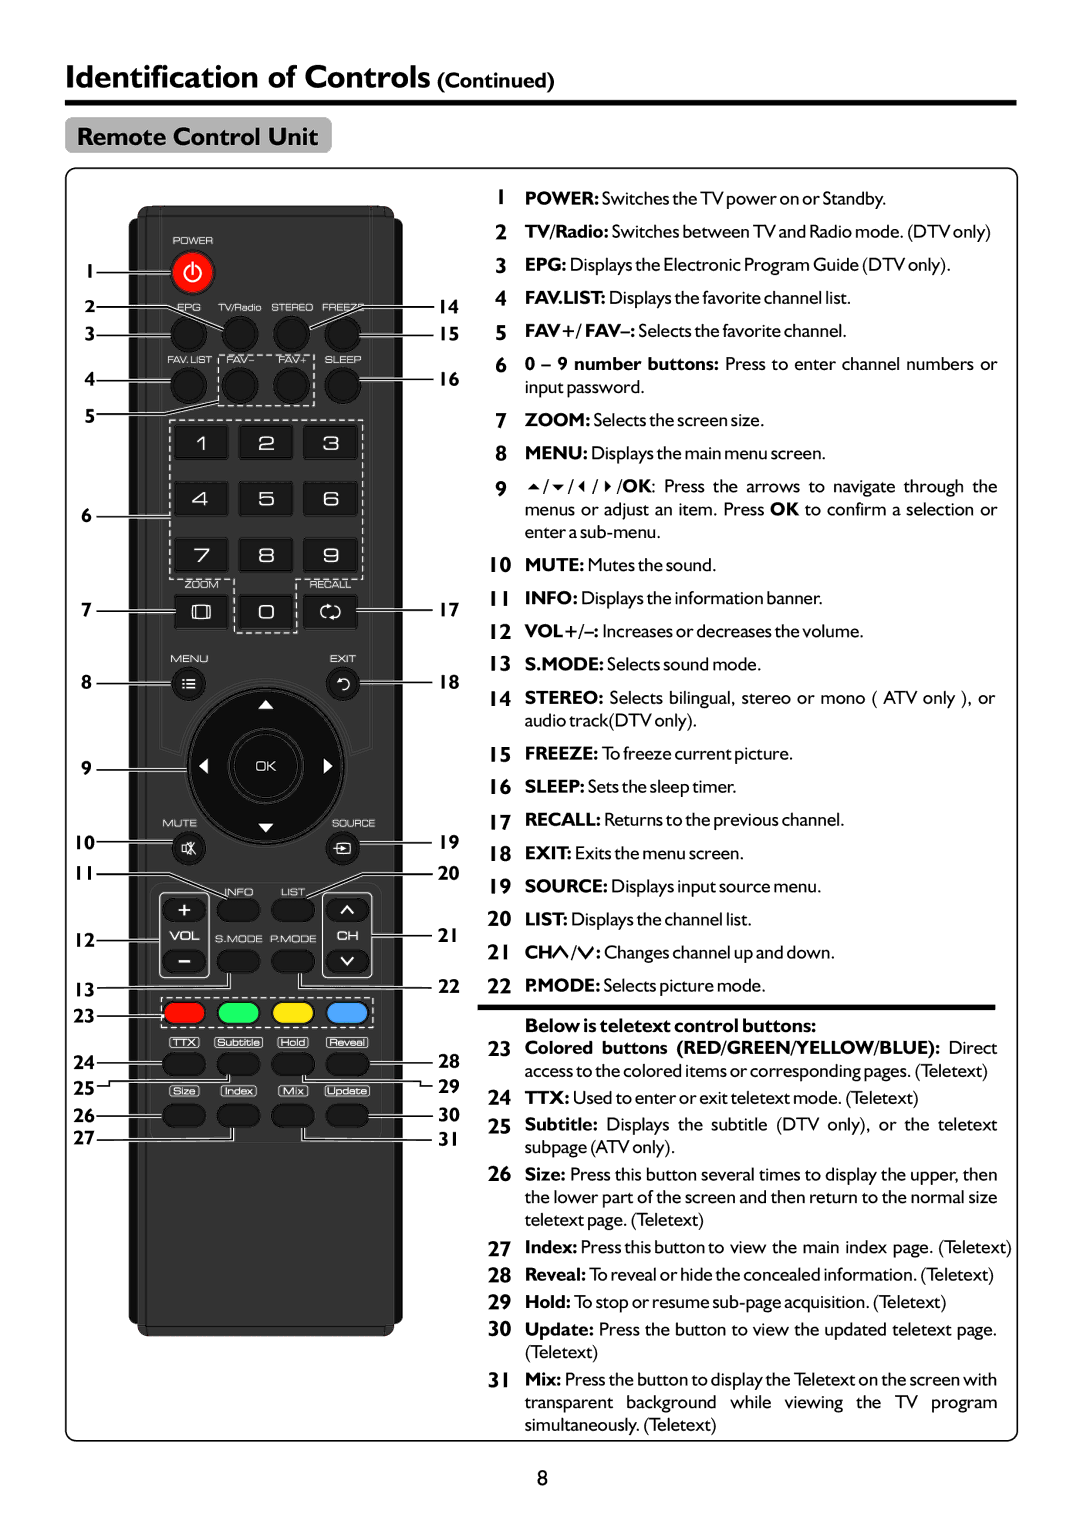 Palsonic TFTV322FHD owner manual Remote Control Unit, Colored buttons RED/GREEN/YELLOW/BLUE Direct 